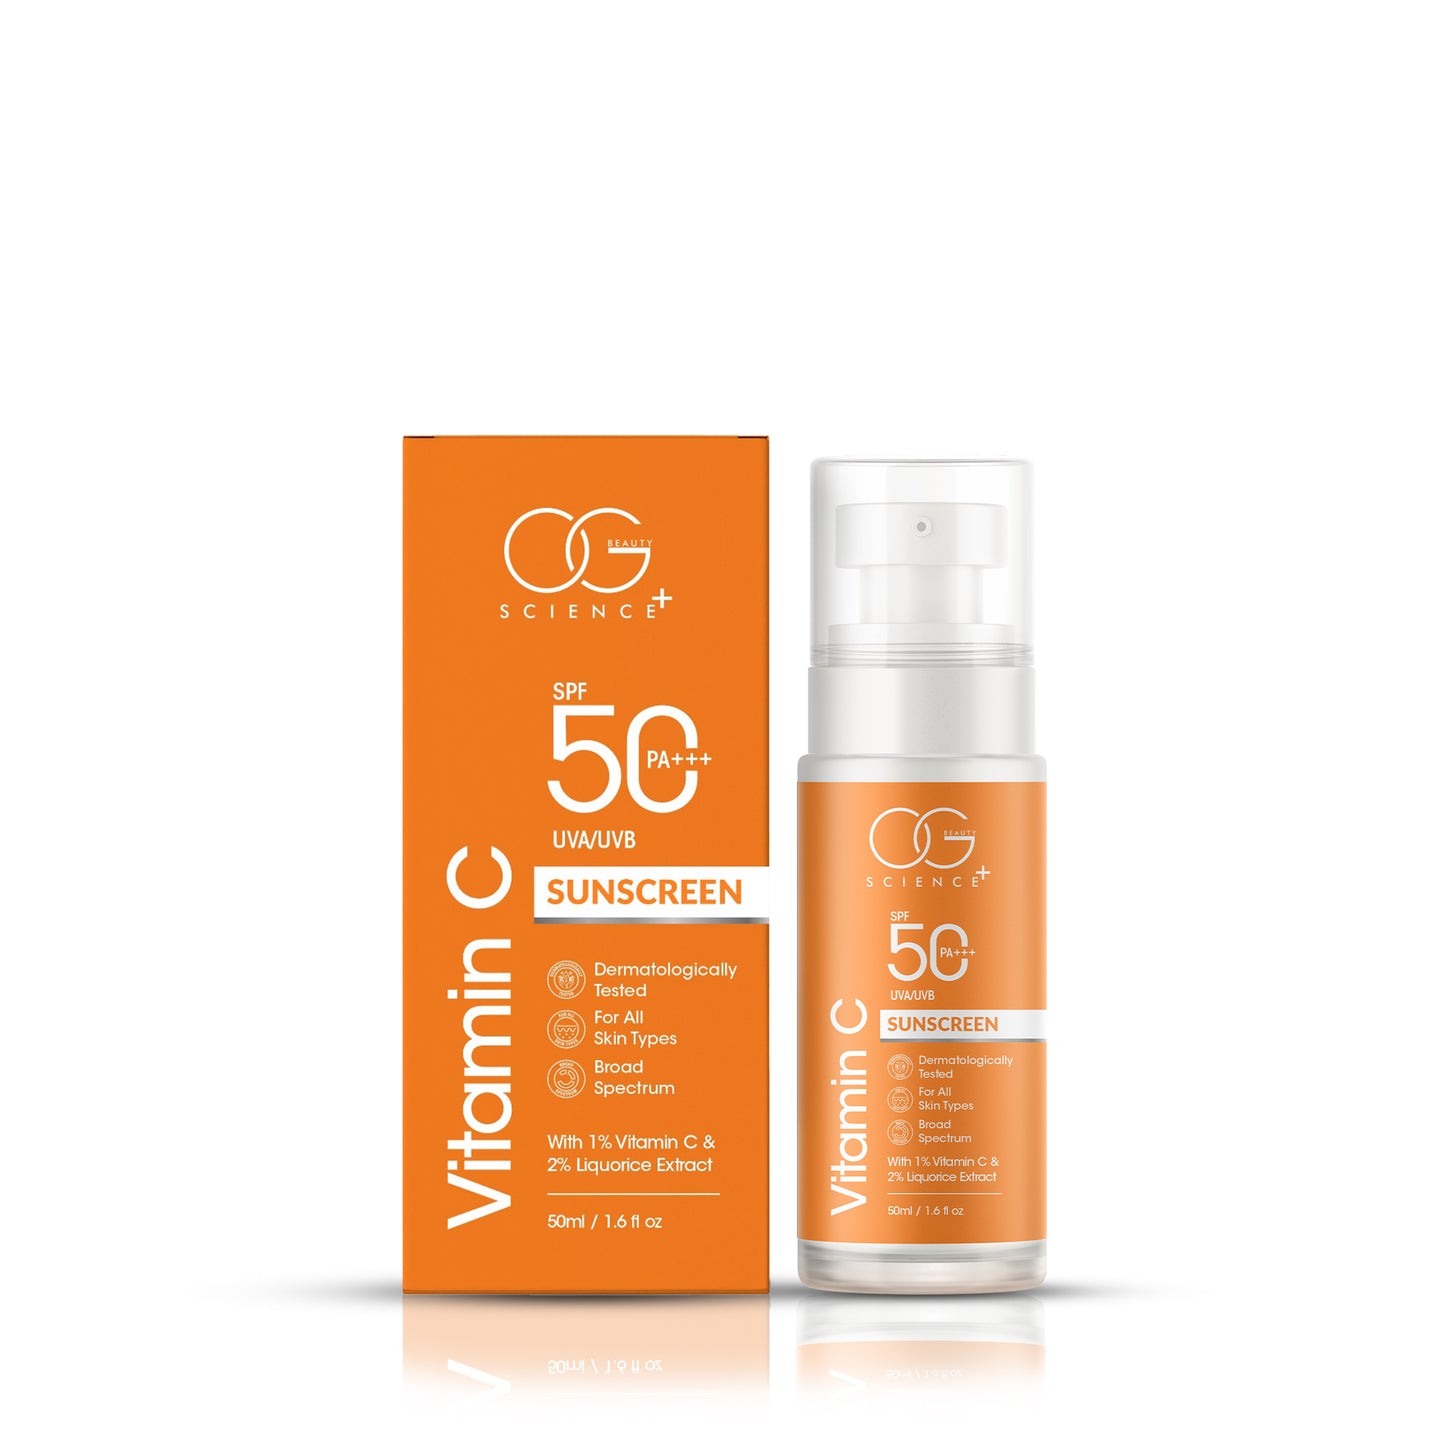 OG BEAUTY SCIENCE SPF 50 PA+++ Sunscreen with Vitamin C & Liquorice Extract